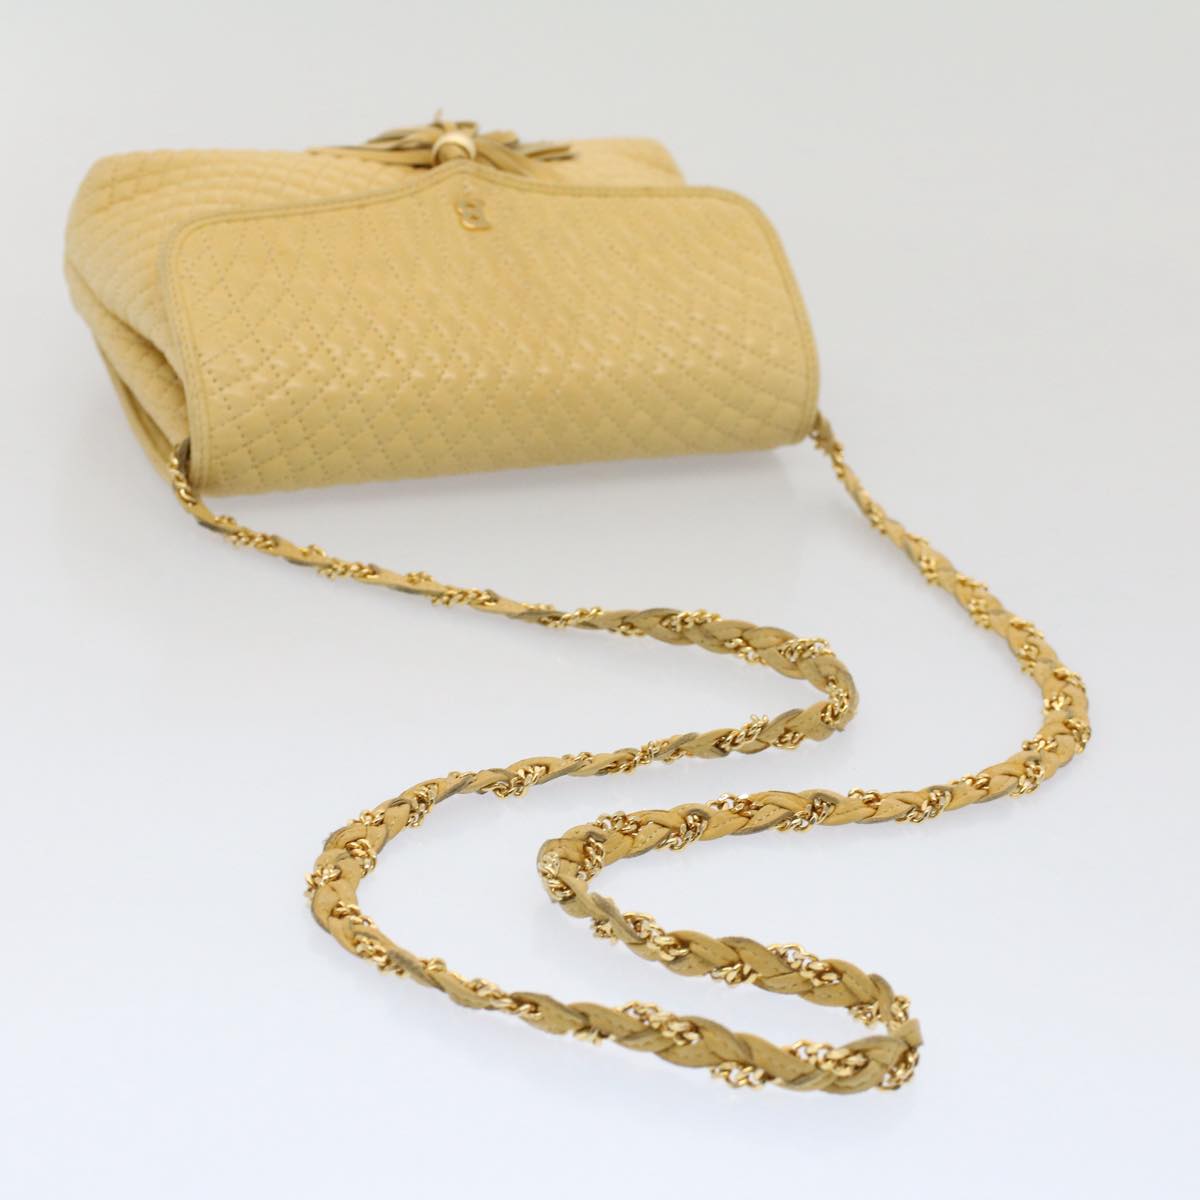 BALLY Quilted Chain Shoulder Bag Leather Beige Auth ep1649